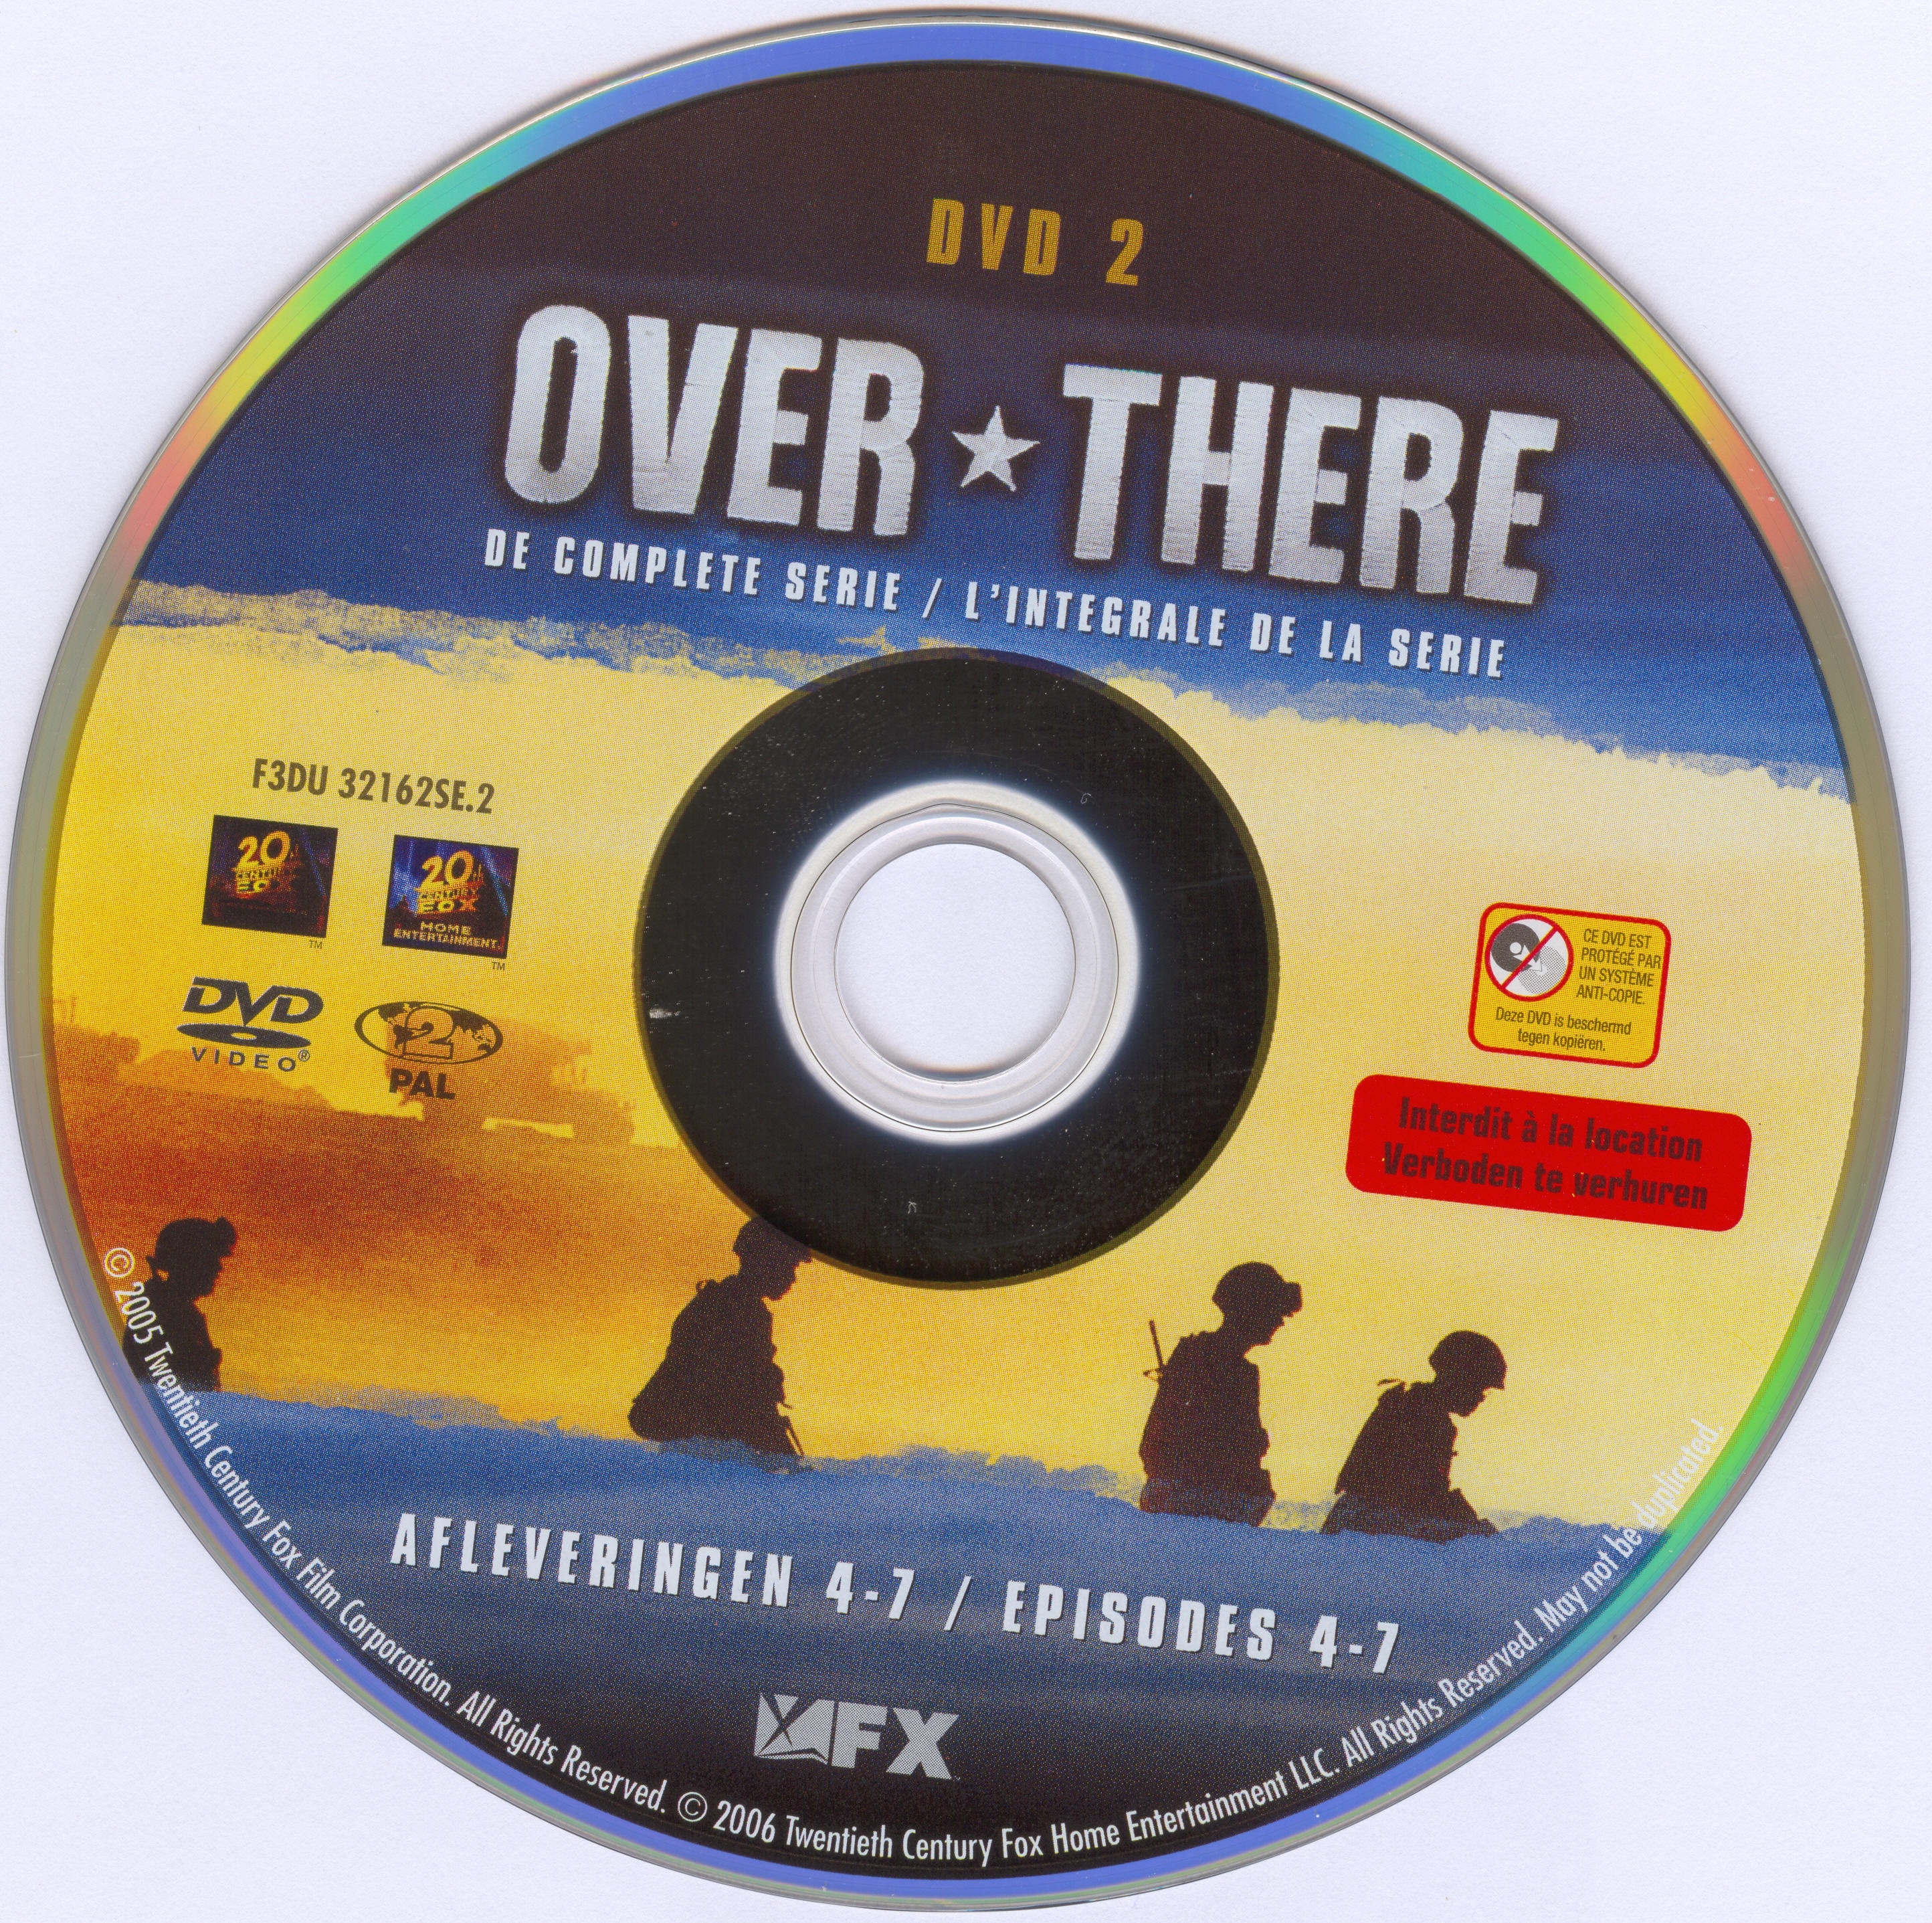 Over there DVD 2